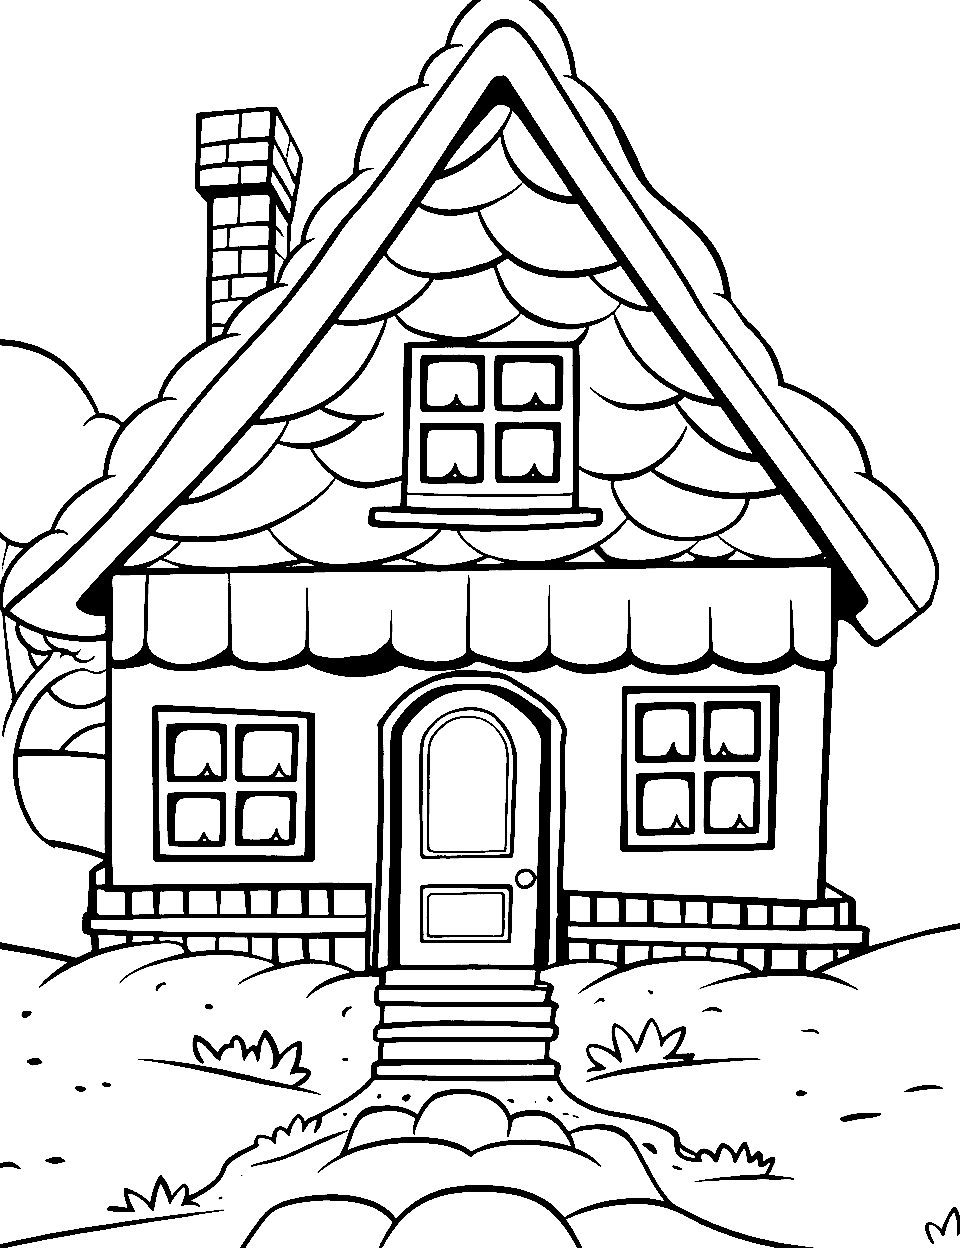 Winter Wonderland Coloring Page - A house gently blanketed by snow in the winter.